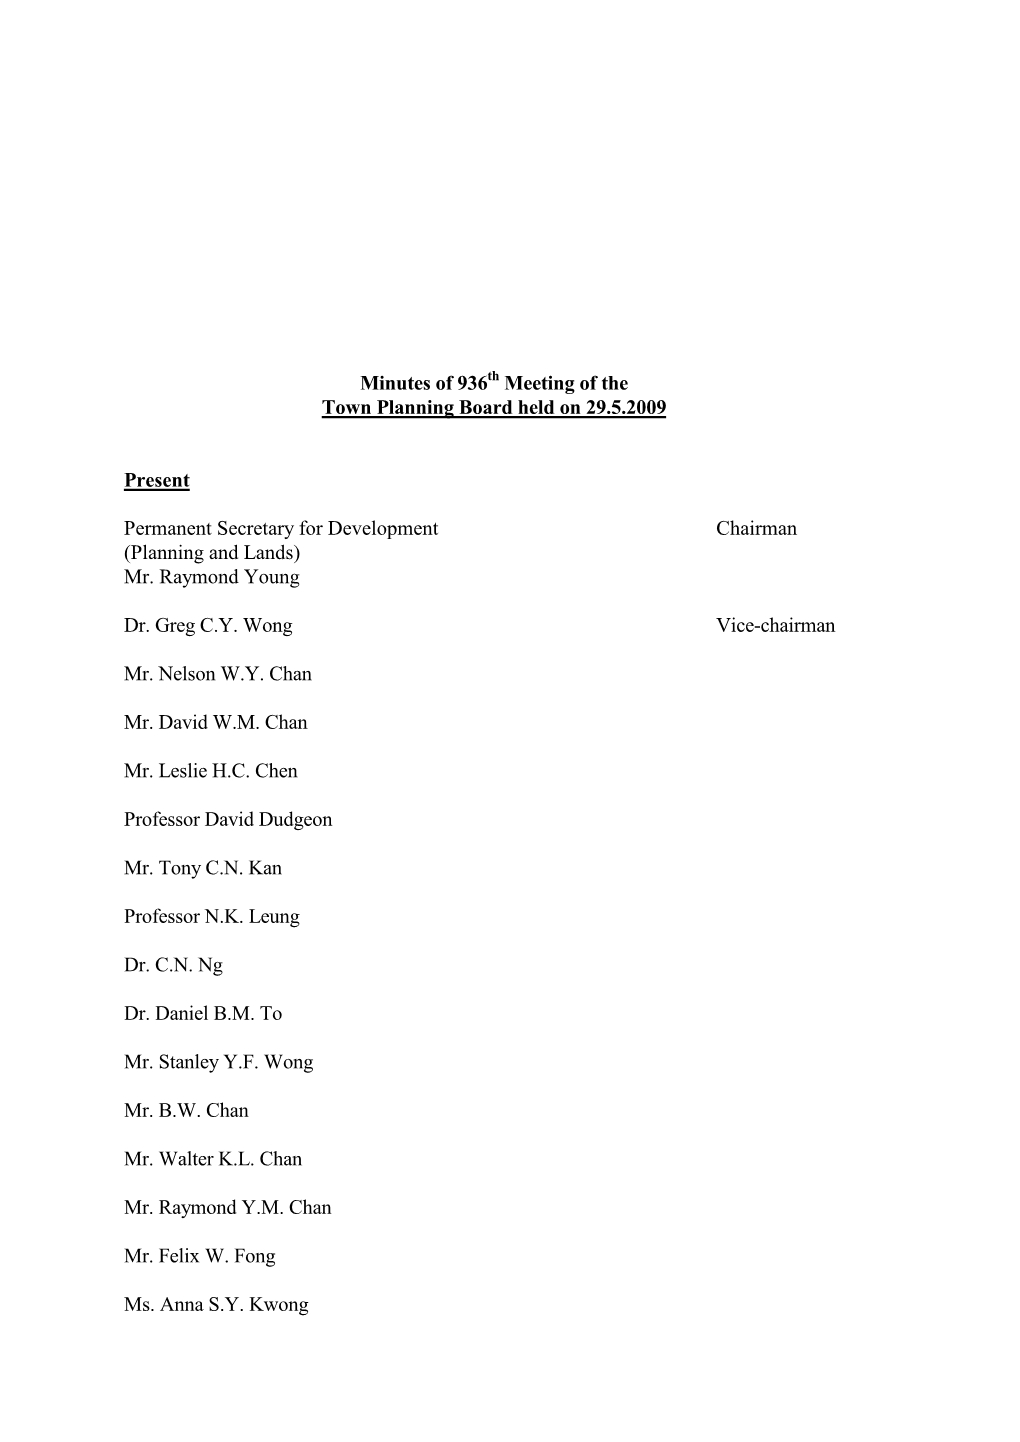 Minutes of 936 Meeting of the Town Planning Board Held on 29.5.2009